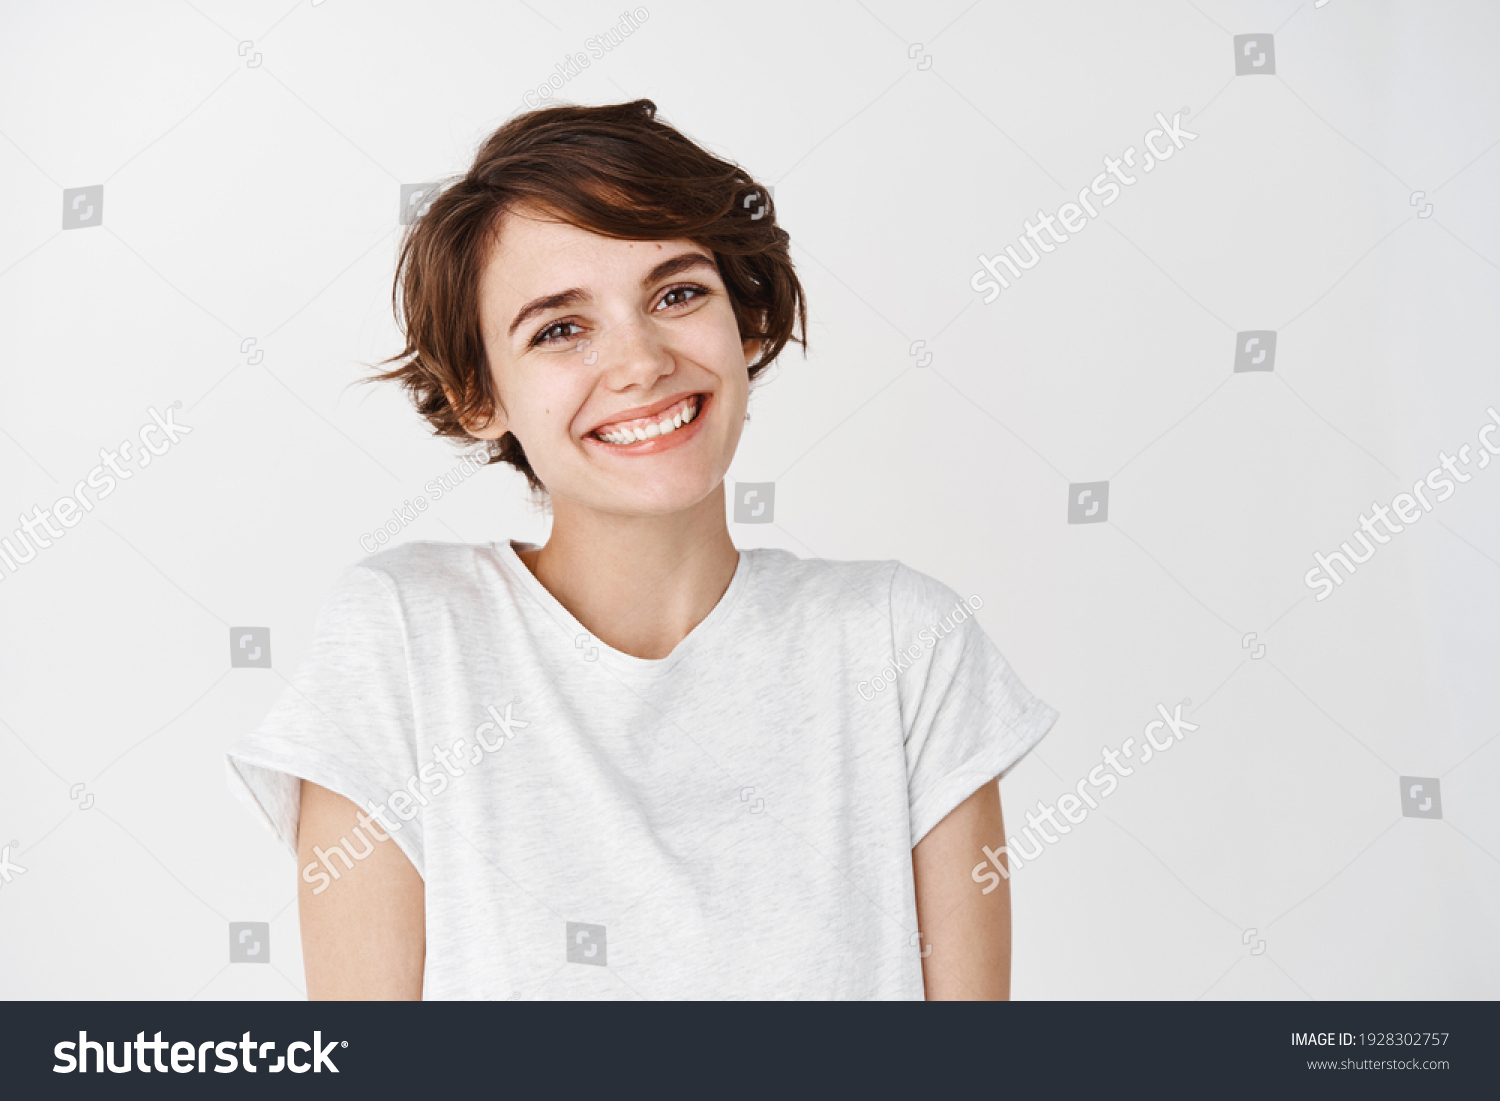 Portrait of authentic happy woman without makeup, smiling at camera, standing cute against white background. #1928302757